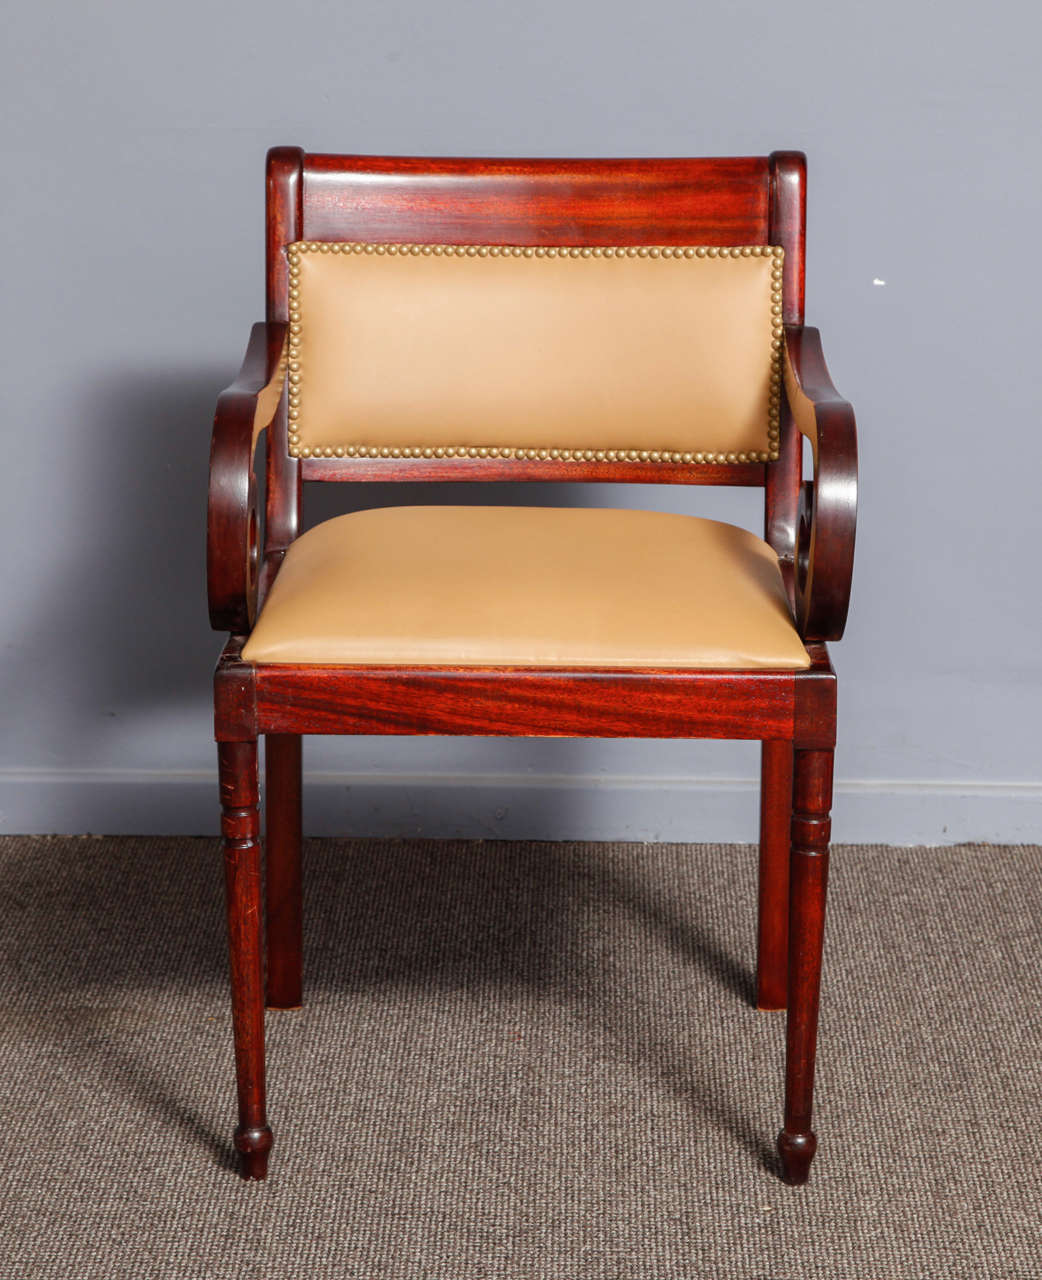 Tinted pine chairs from the early Art Deco period , beige coloured leather upholstery.